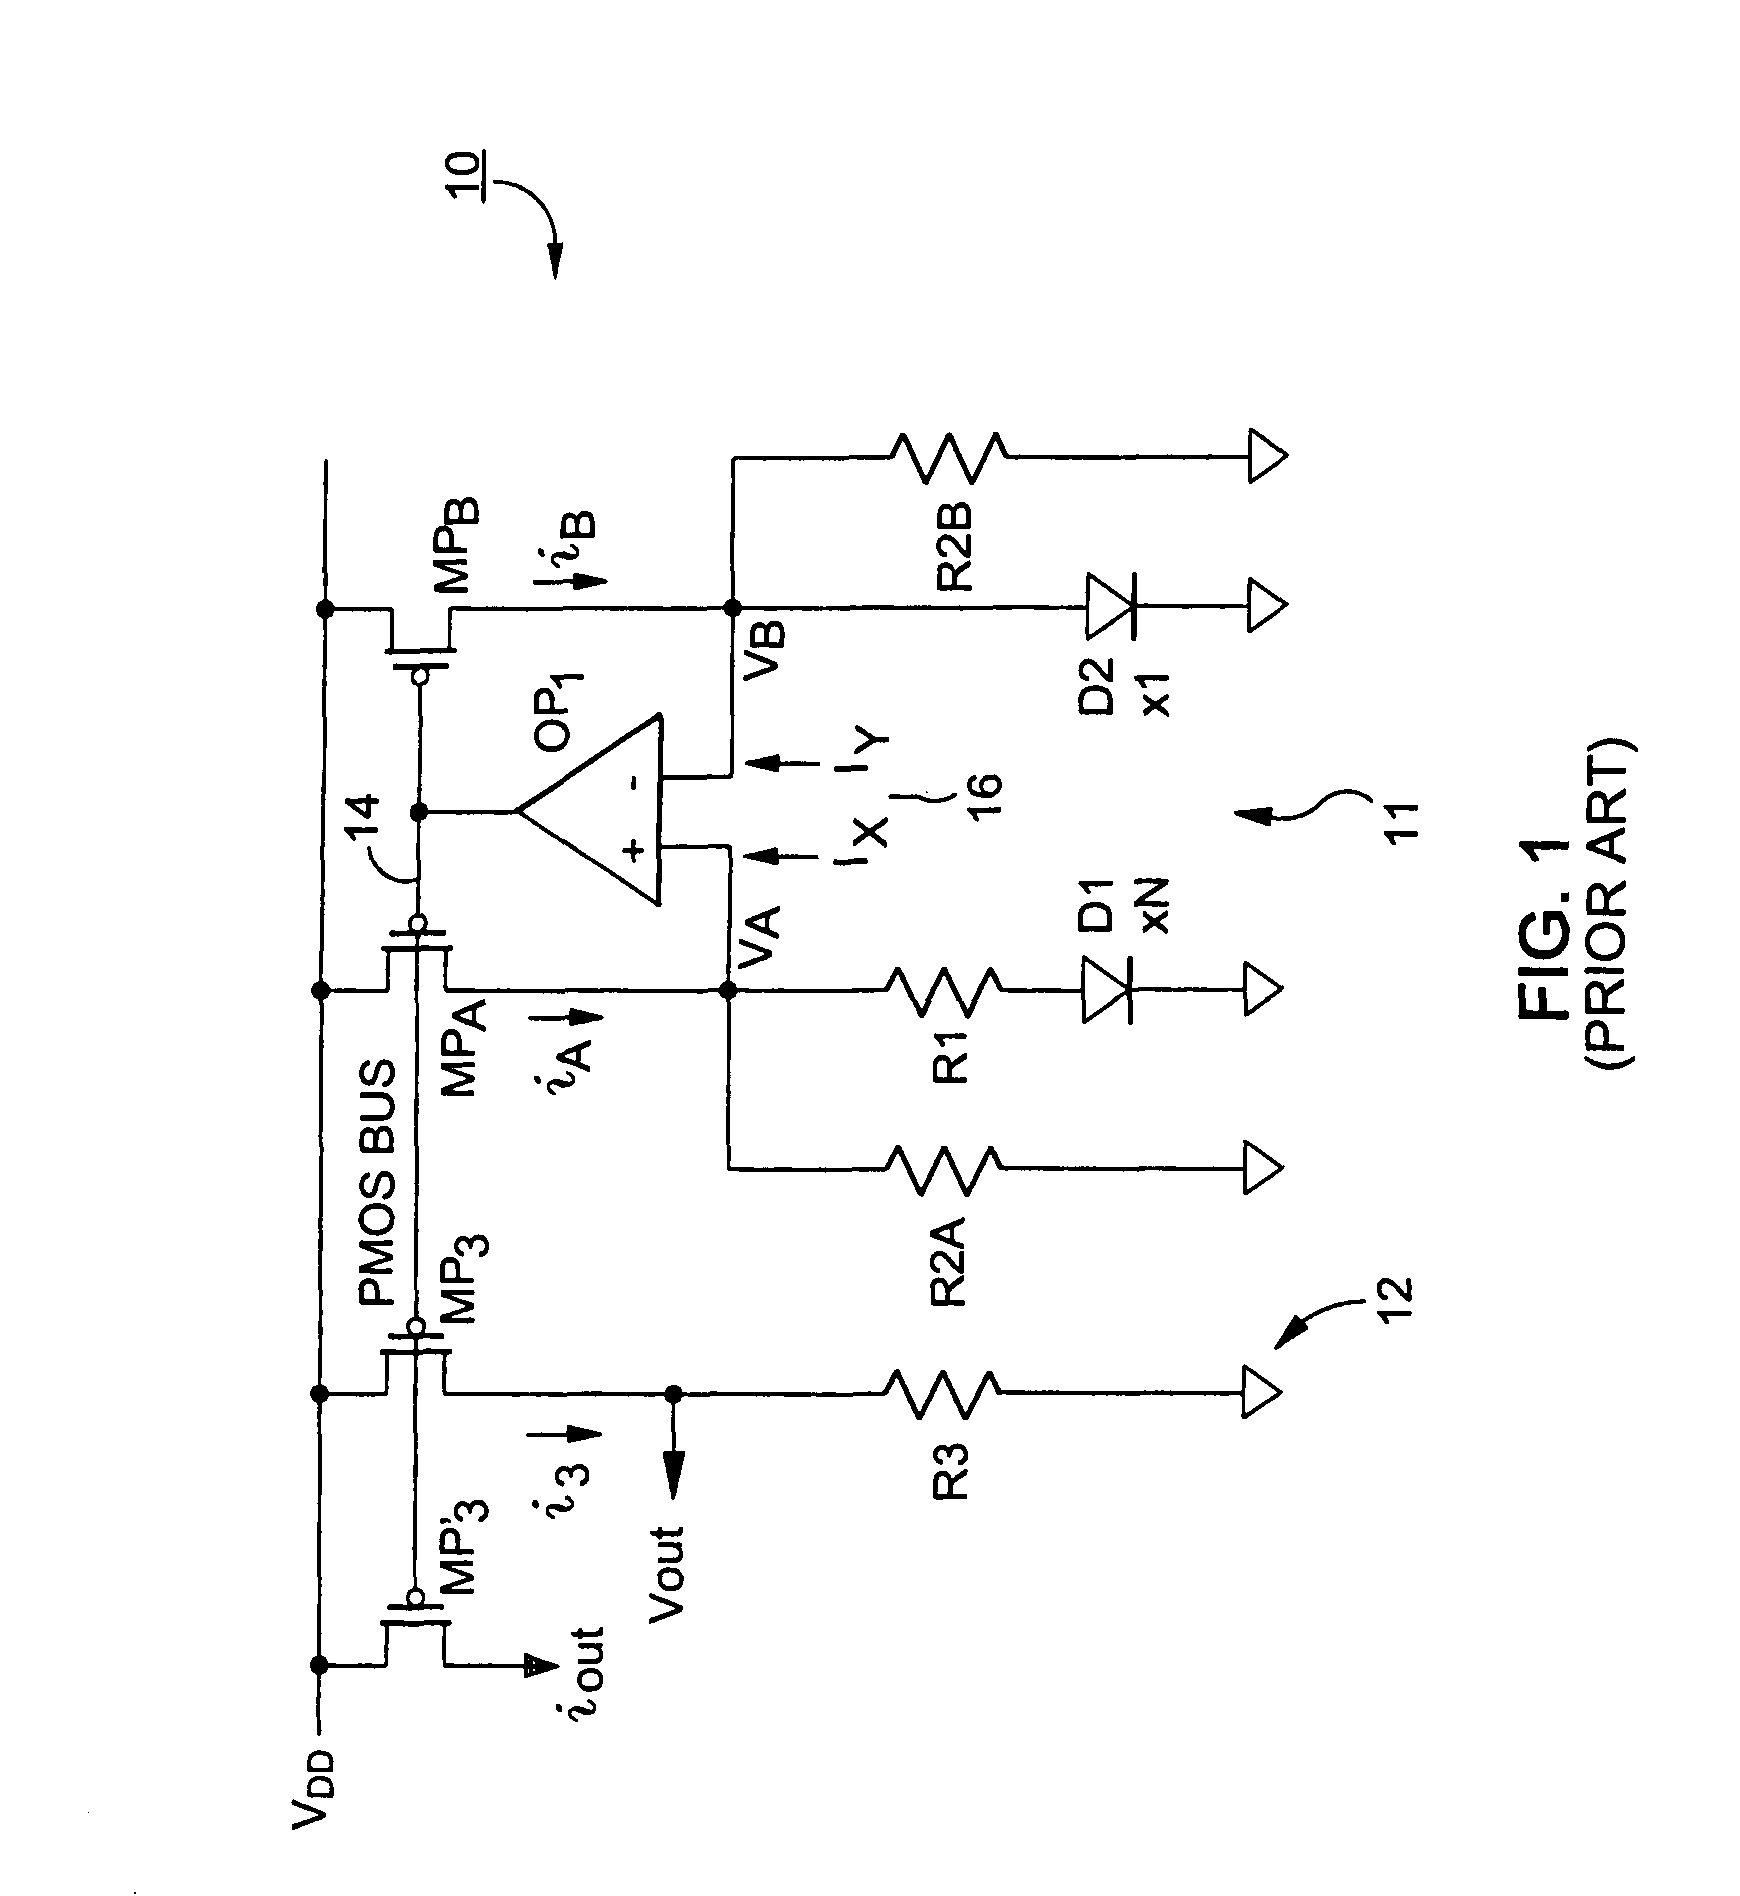 Start-up circuit for bandgap reference